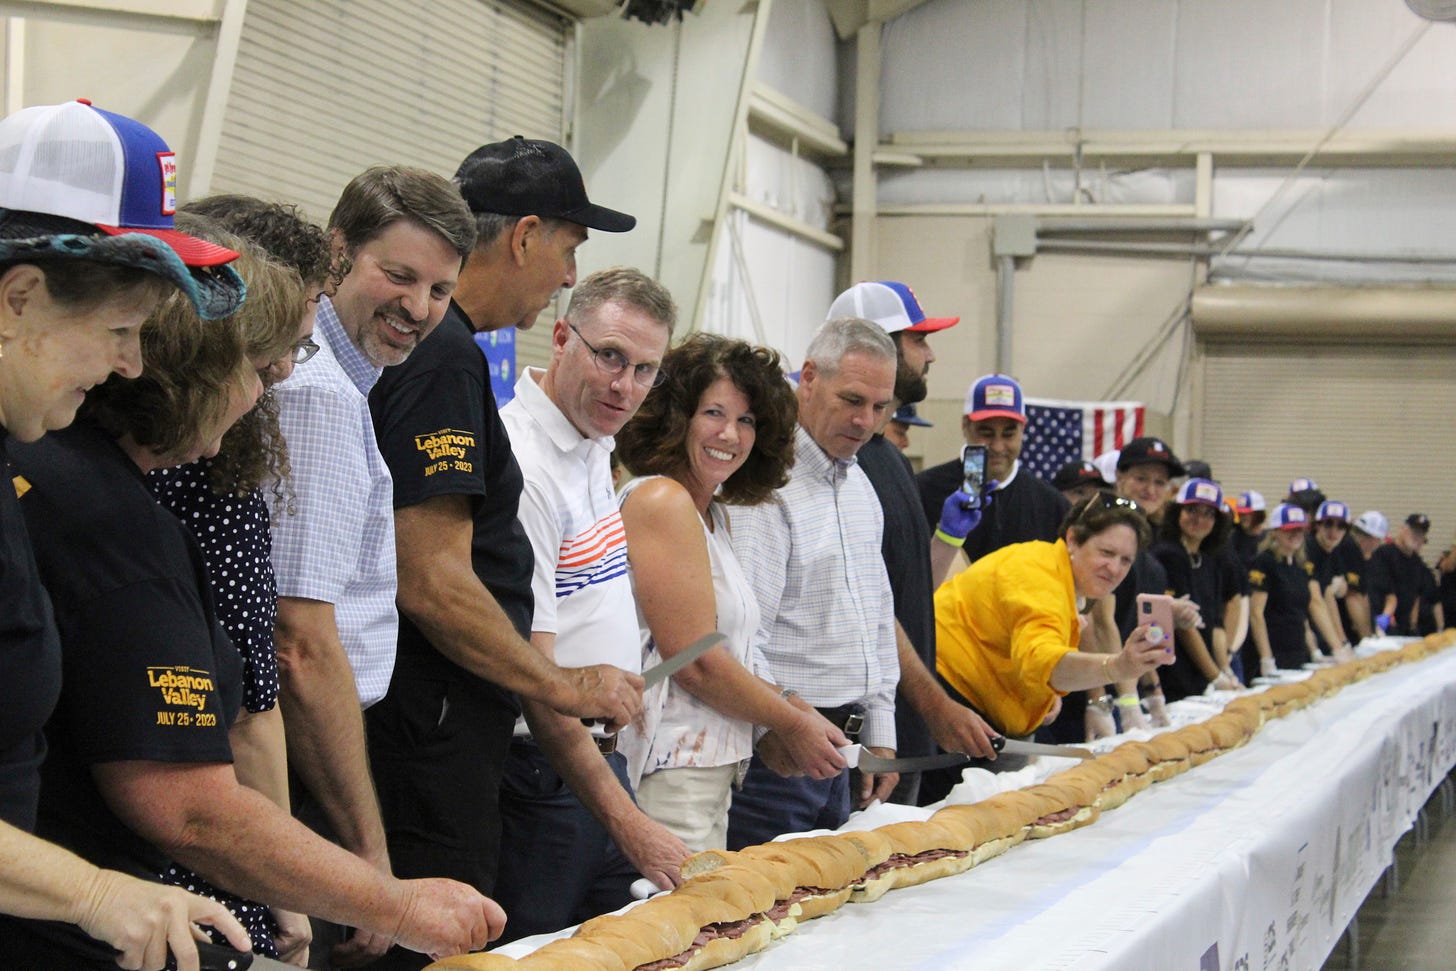 Volunteers help assemble the 150-foot-long (45.7-meters-long) bologna sandwich at the Lebanon Area Fair on Tuesday, July 25, 2023 in Lebanon, Pa. Every footlong “bite” was sponsored at $100 per foot.